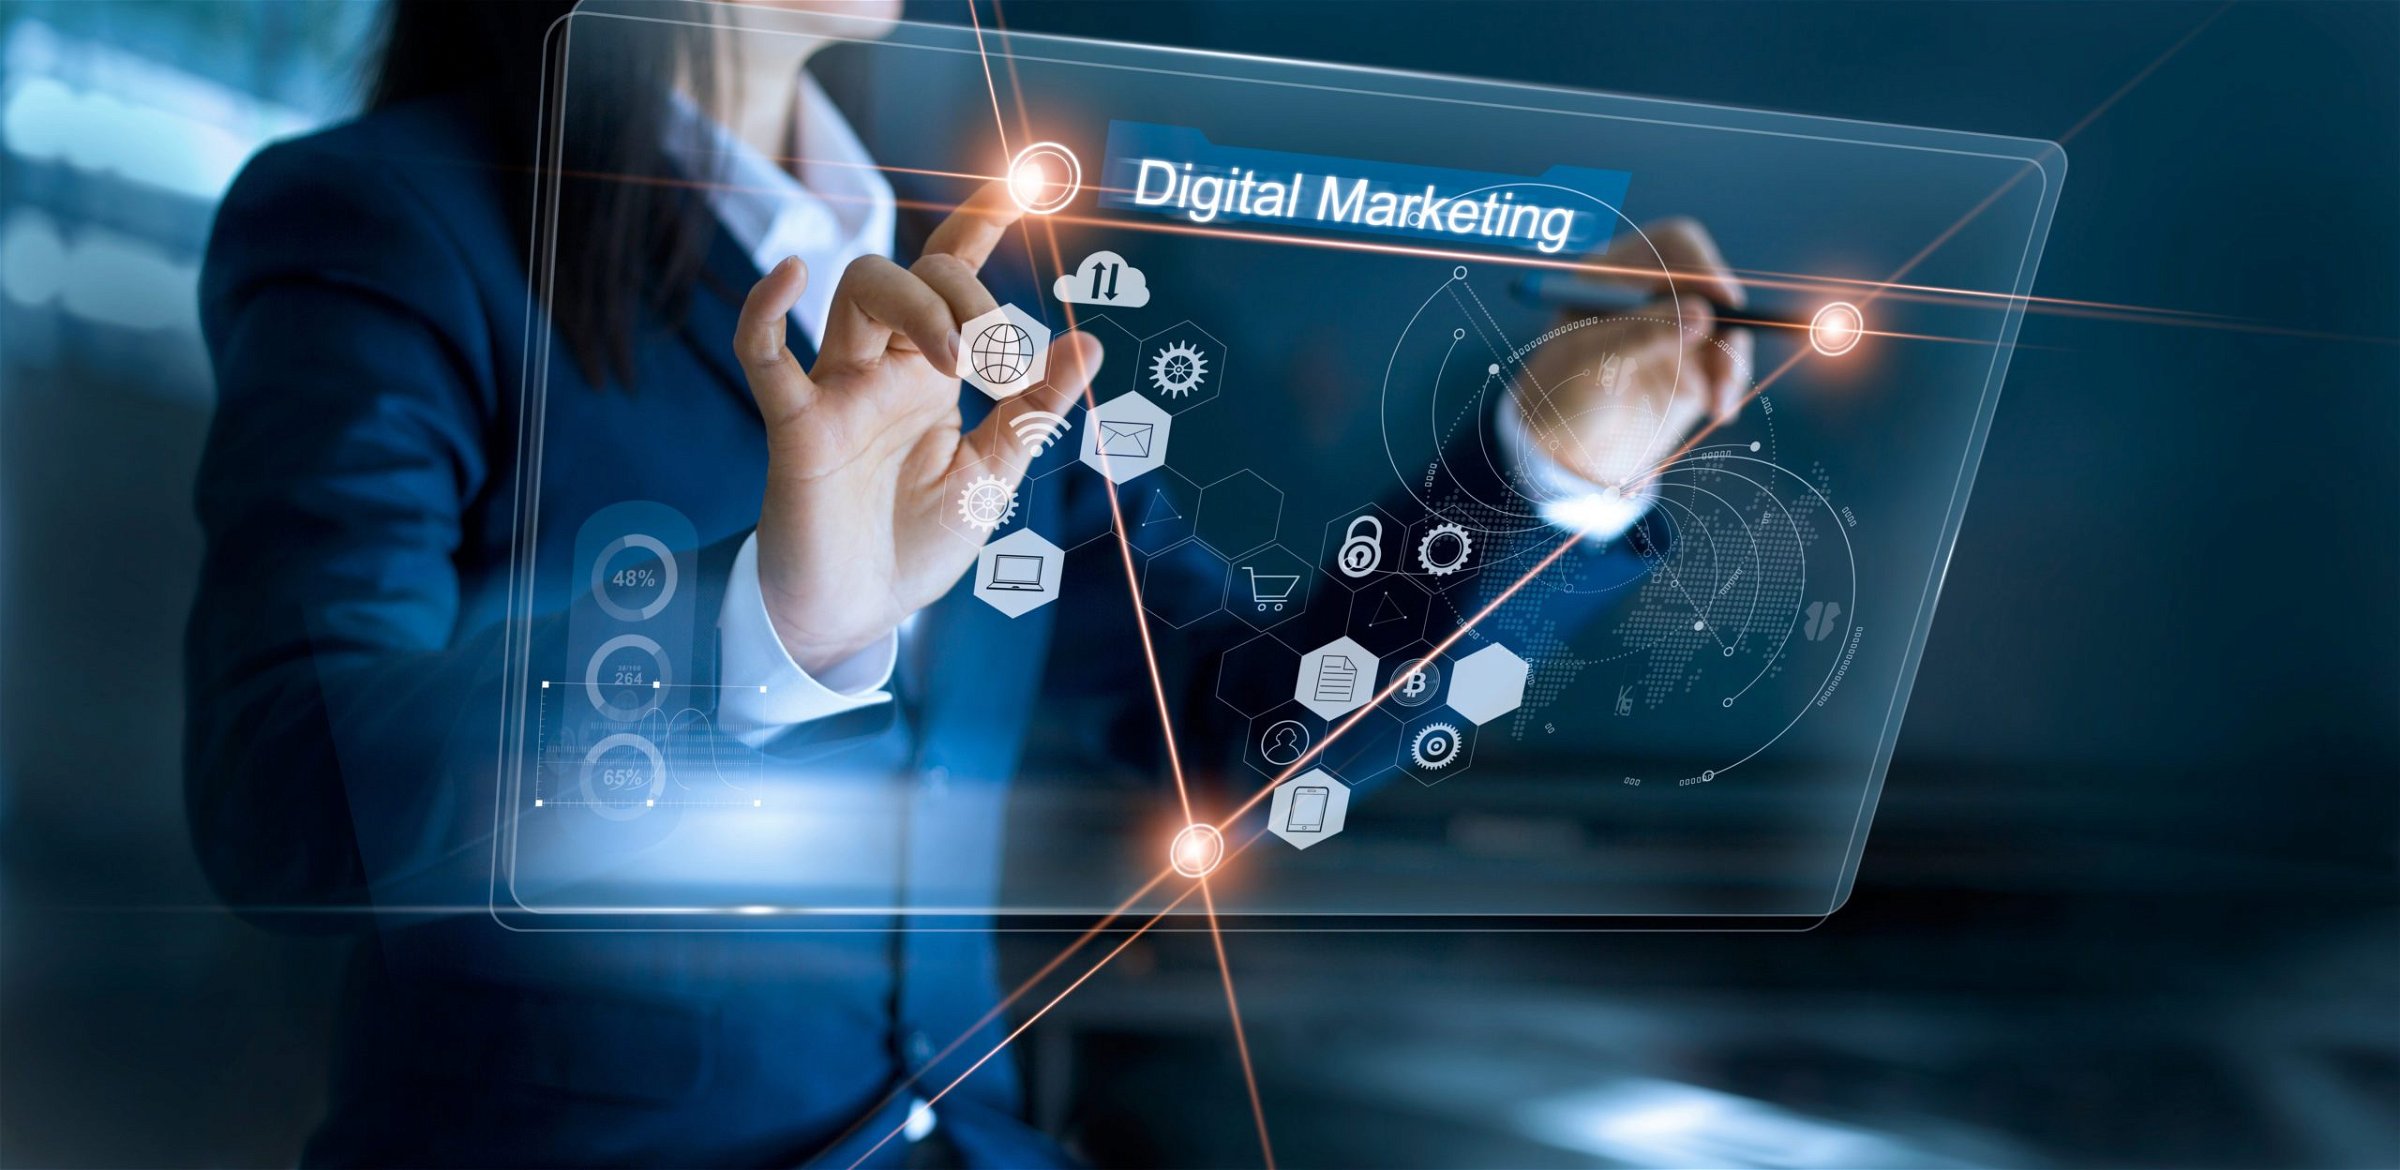 What you must consider while looking for the best Digital Marketing Course